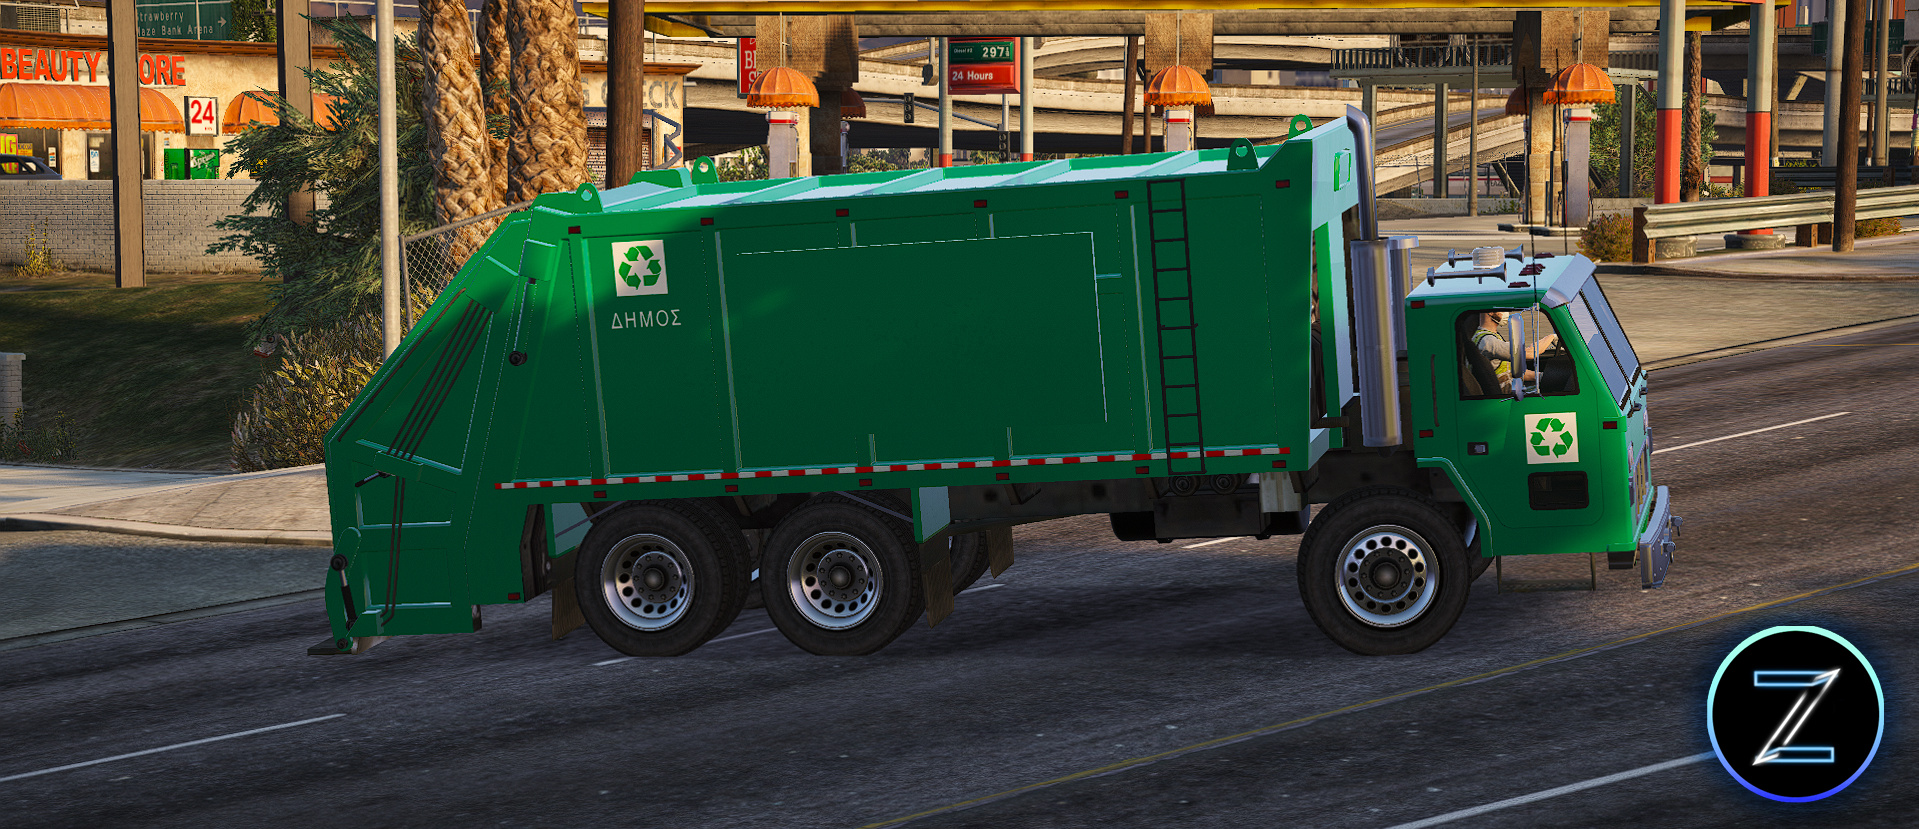 green garbage truck powered by natural gas